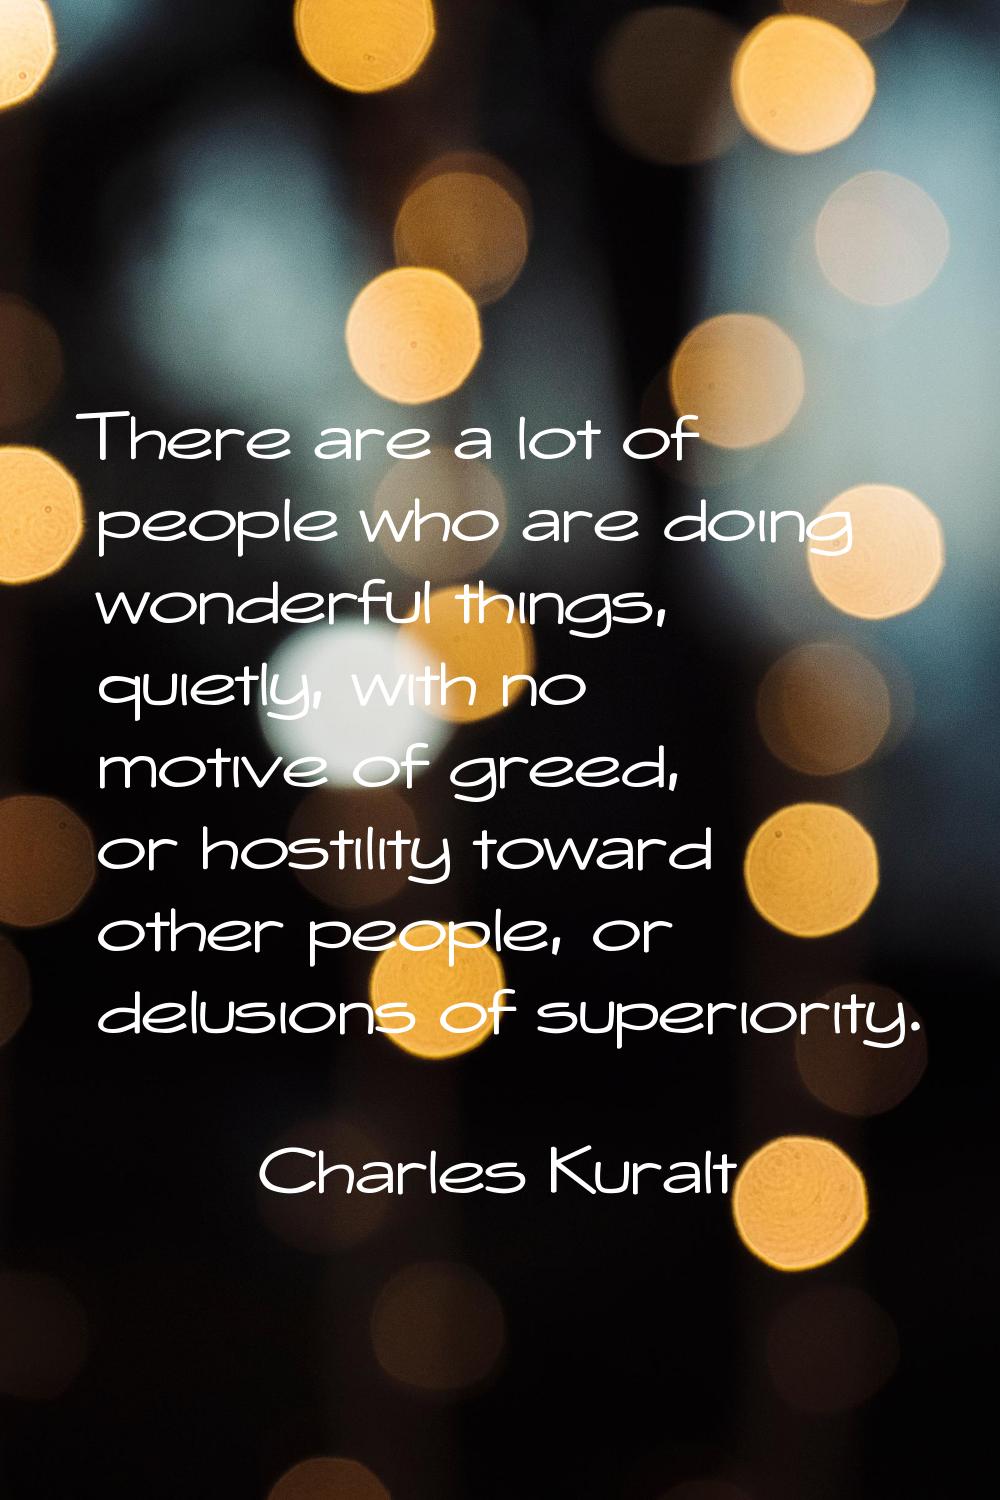 There are a lot of people who are doing wonderful things, quietly, with no motive of greed, or host